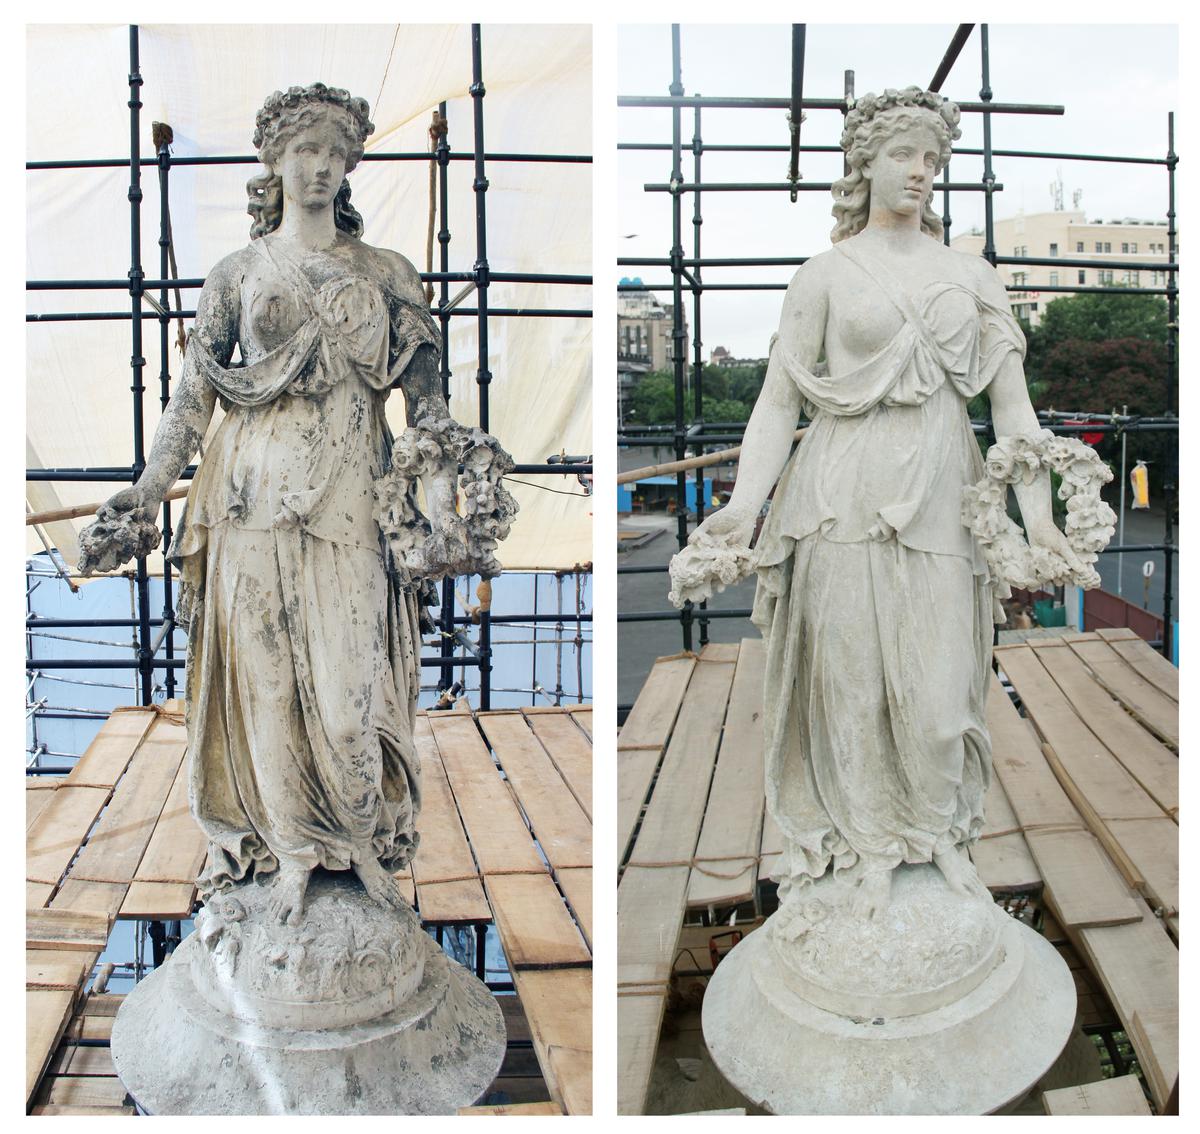 19th Century, limestone Flora Fountain in Mumbai before and after restoration